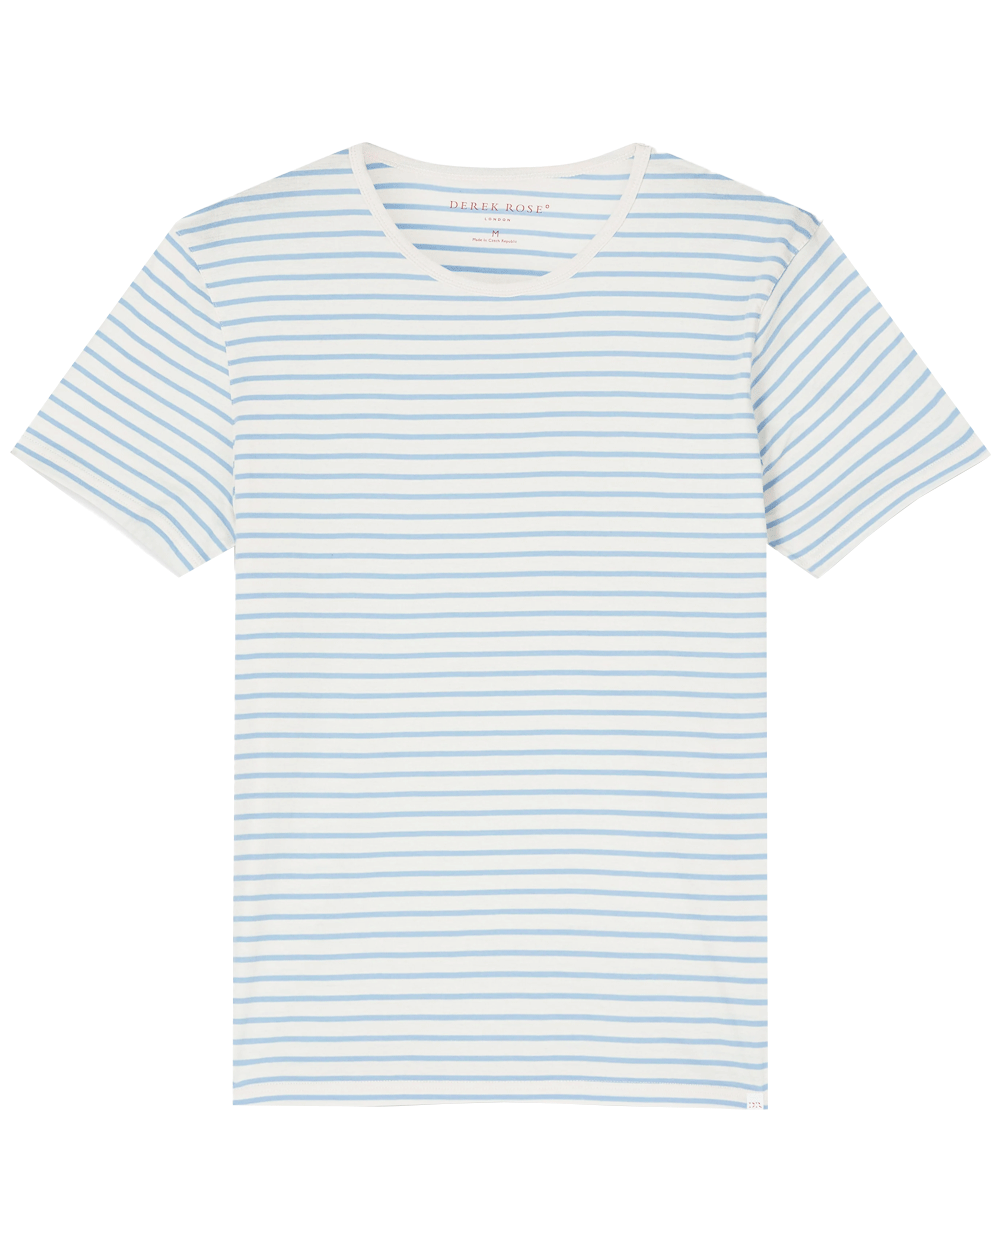 White and Blue Striped Pima Cotton Short Sleeve T-Shirt